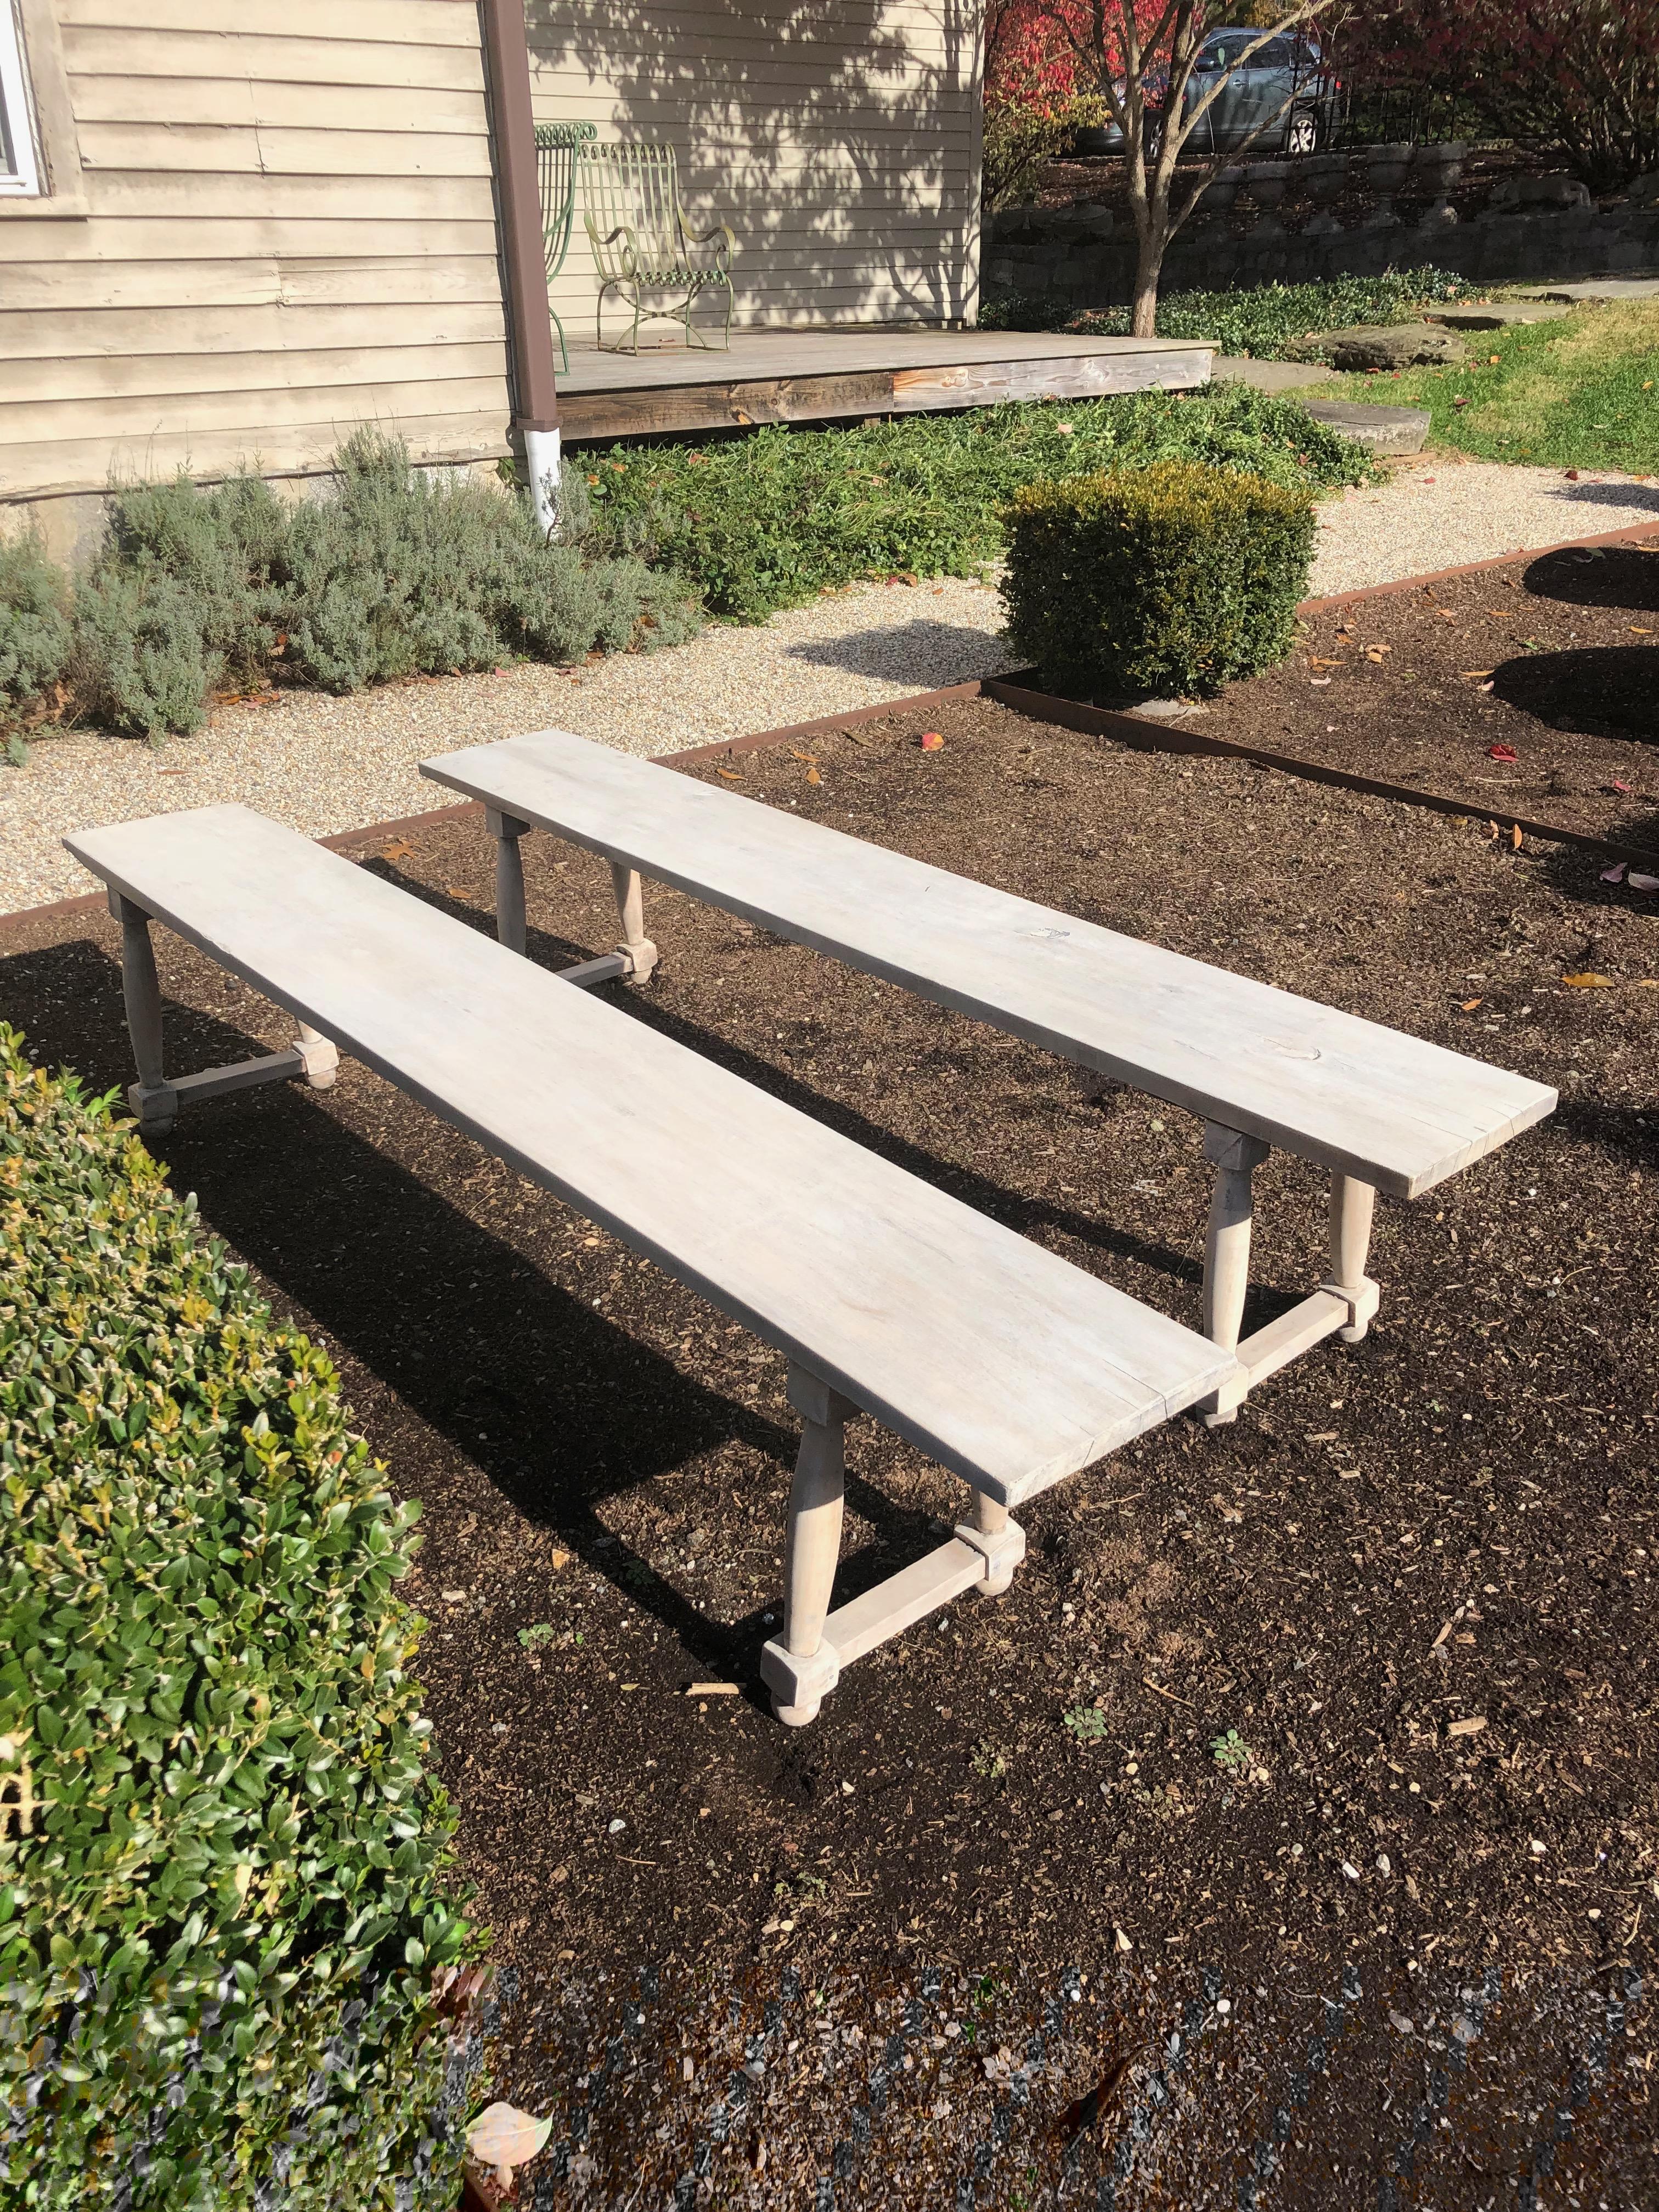 We are always looking for great pairs of long benches and this pair does not disappoint. The plank tops have been handcut of French oak and the legs, which we think are beech, have been sanded and washed in a pale semi-translucent paint that allows